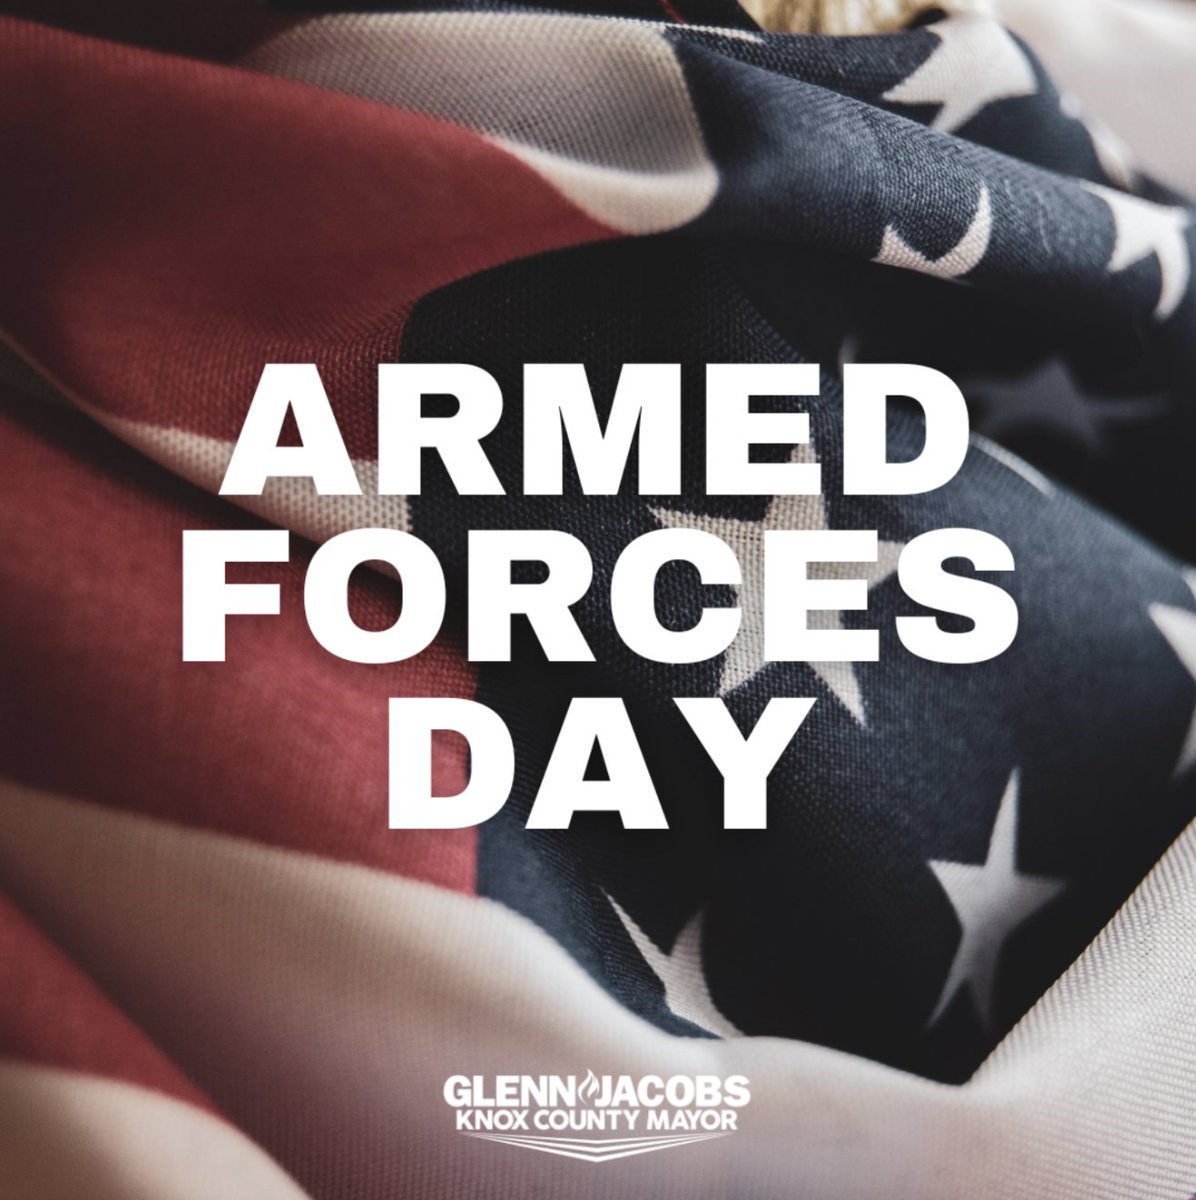 Thank you to all who have served our nation in uniform over the years. #ArmedForcesDay